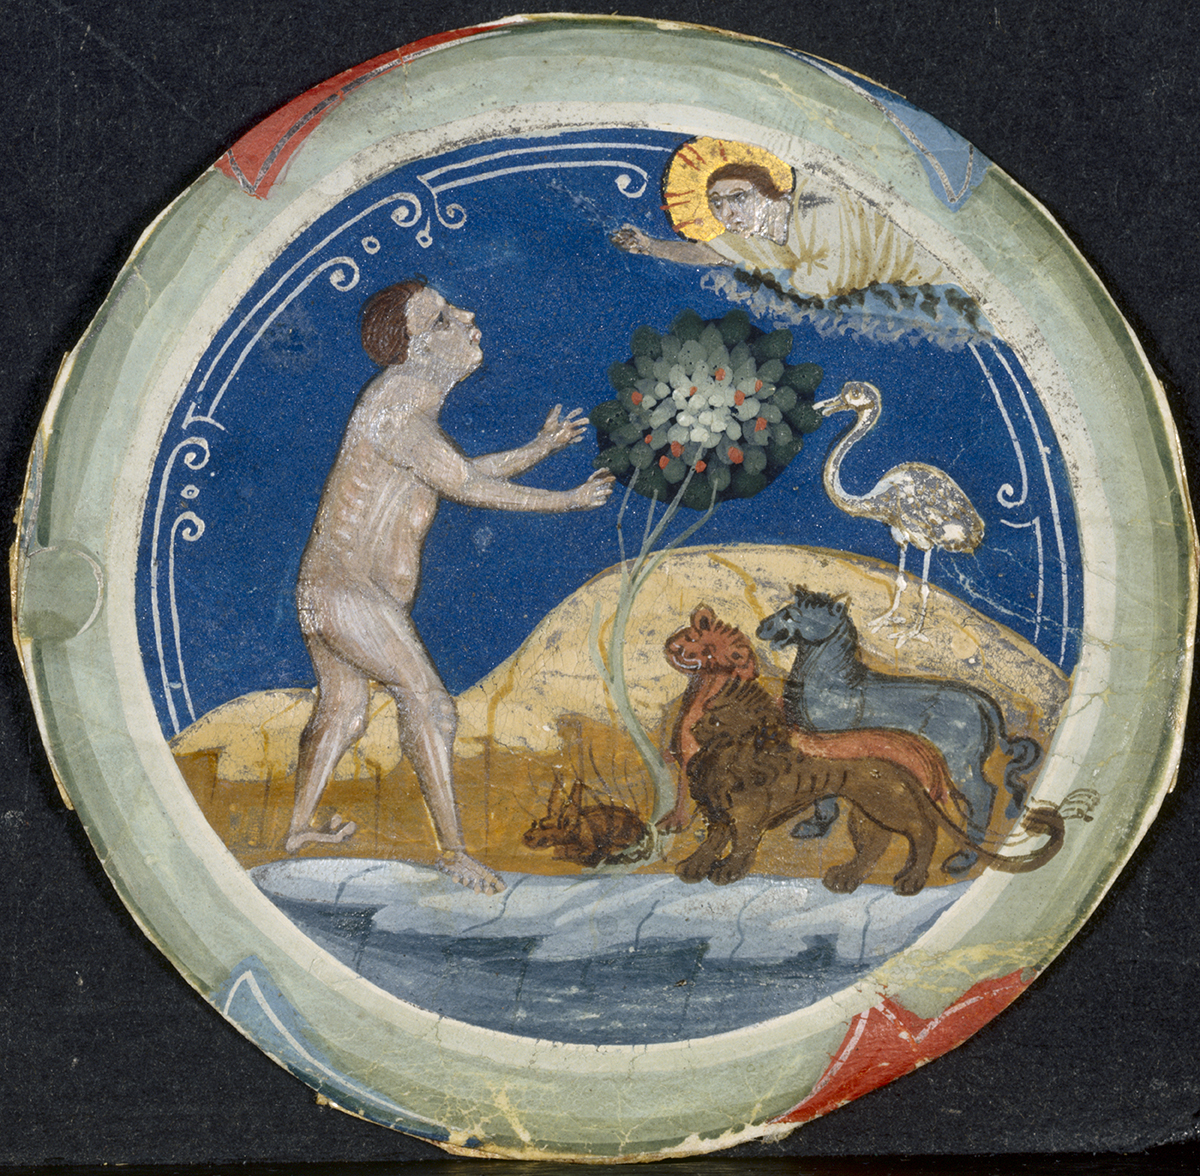 On a round canvas, against a night-blue sky, a nude man is looking at a haloed figure as animals stare at the nude. The background is a night-blue sky, water is in the foreground and a long-necked bird stands on a hill eating from a tree.